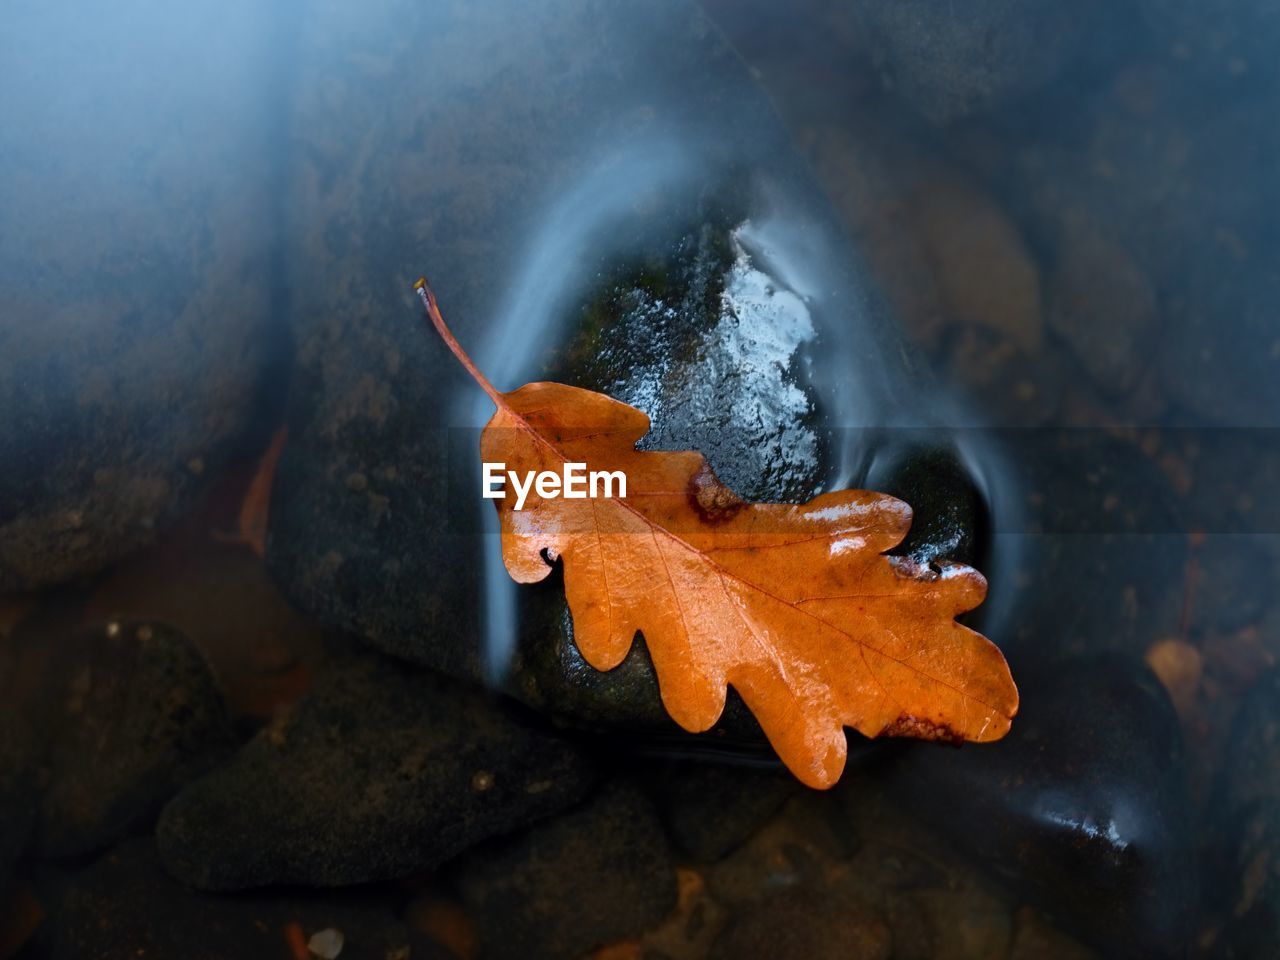 Caught rotten old oak leaf on stone in blurred water of mountain river, first autumn leaves.